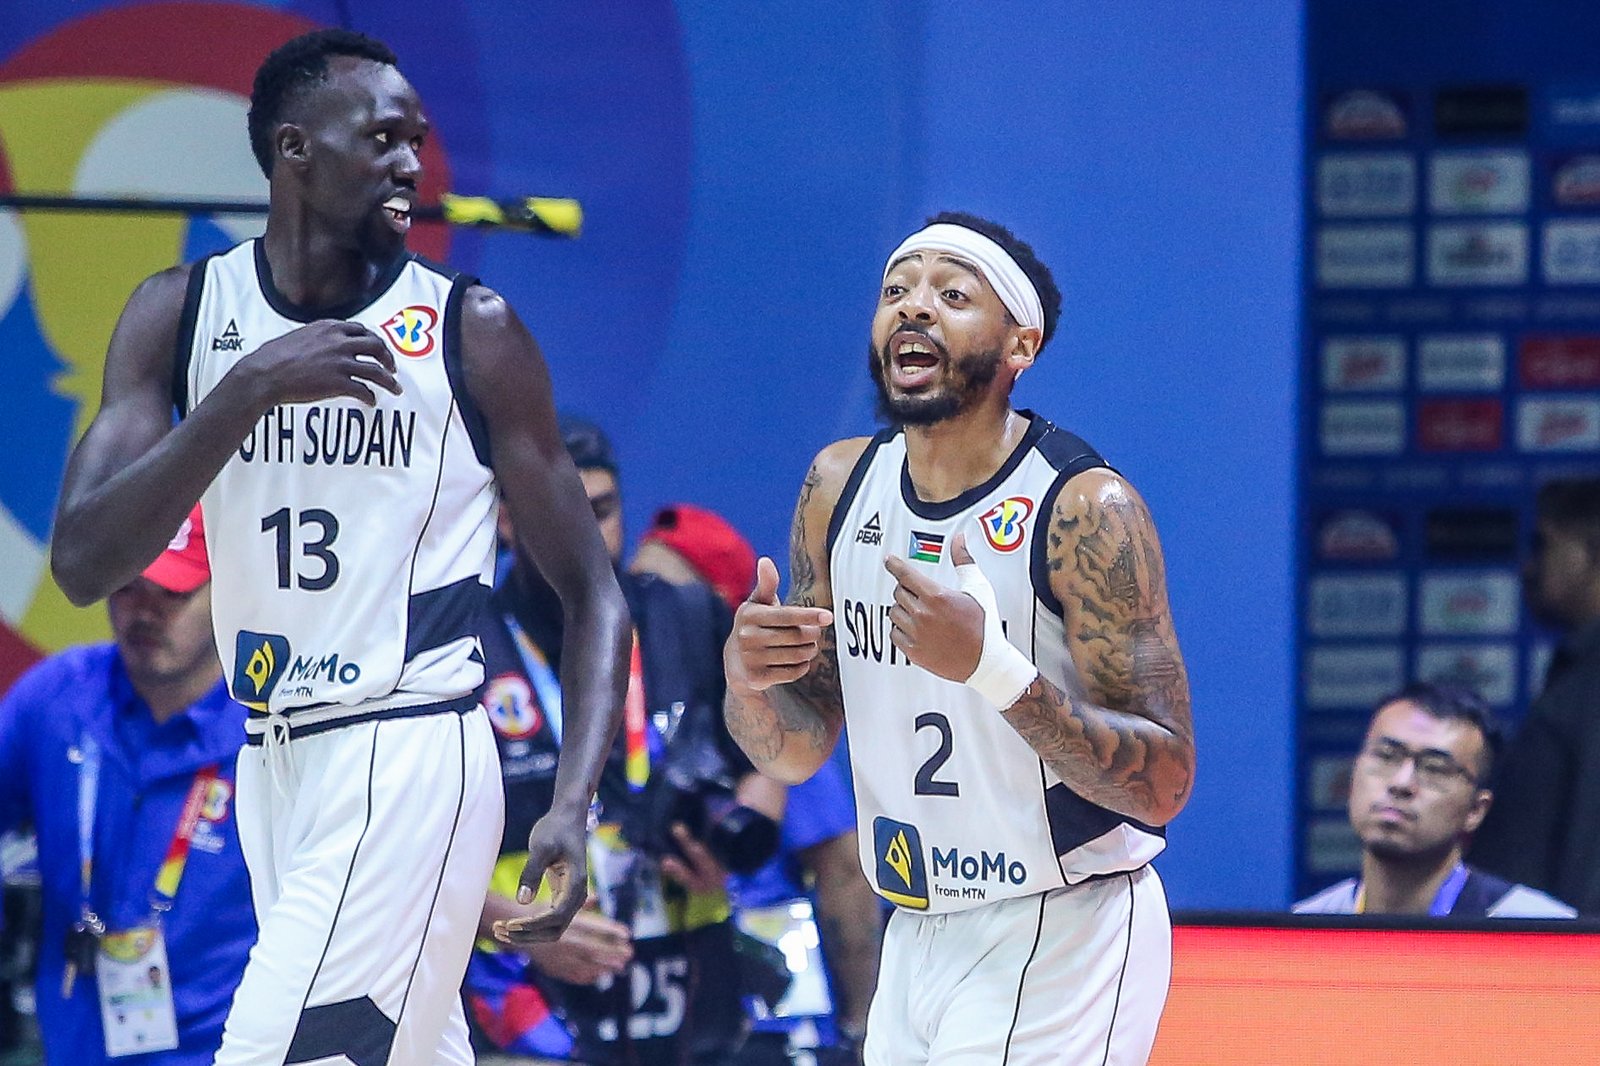 From Manila to France, South Sudan eyes victory beyond basketball